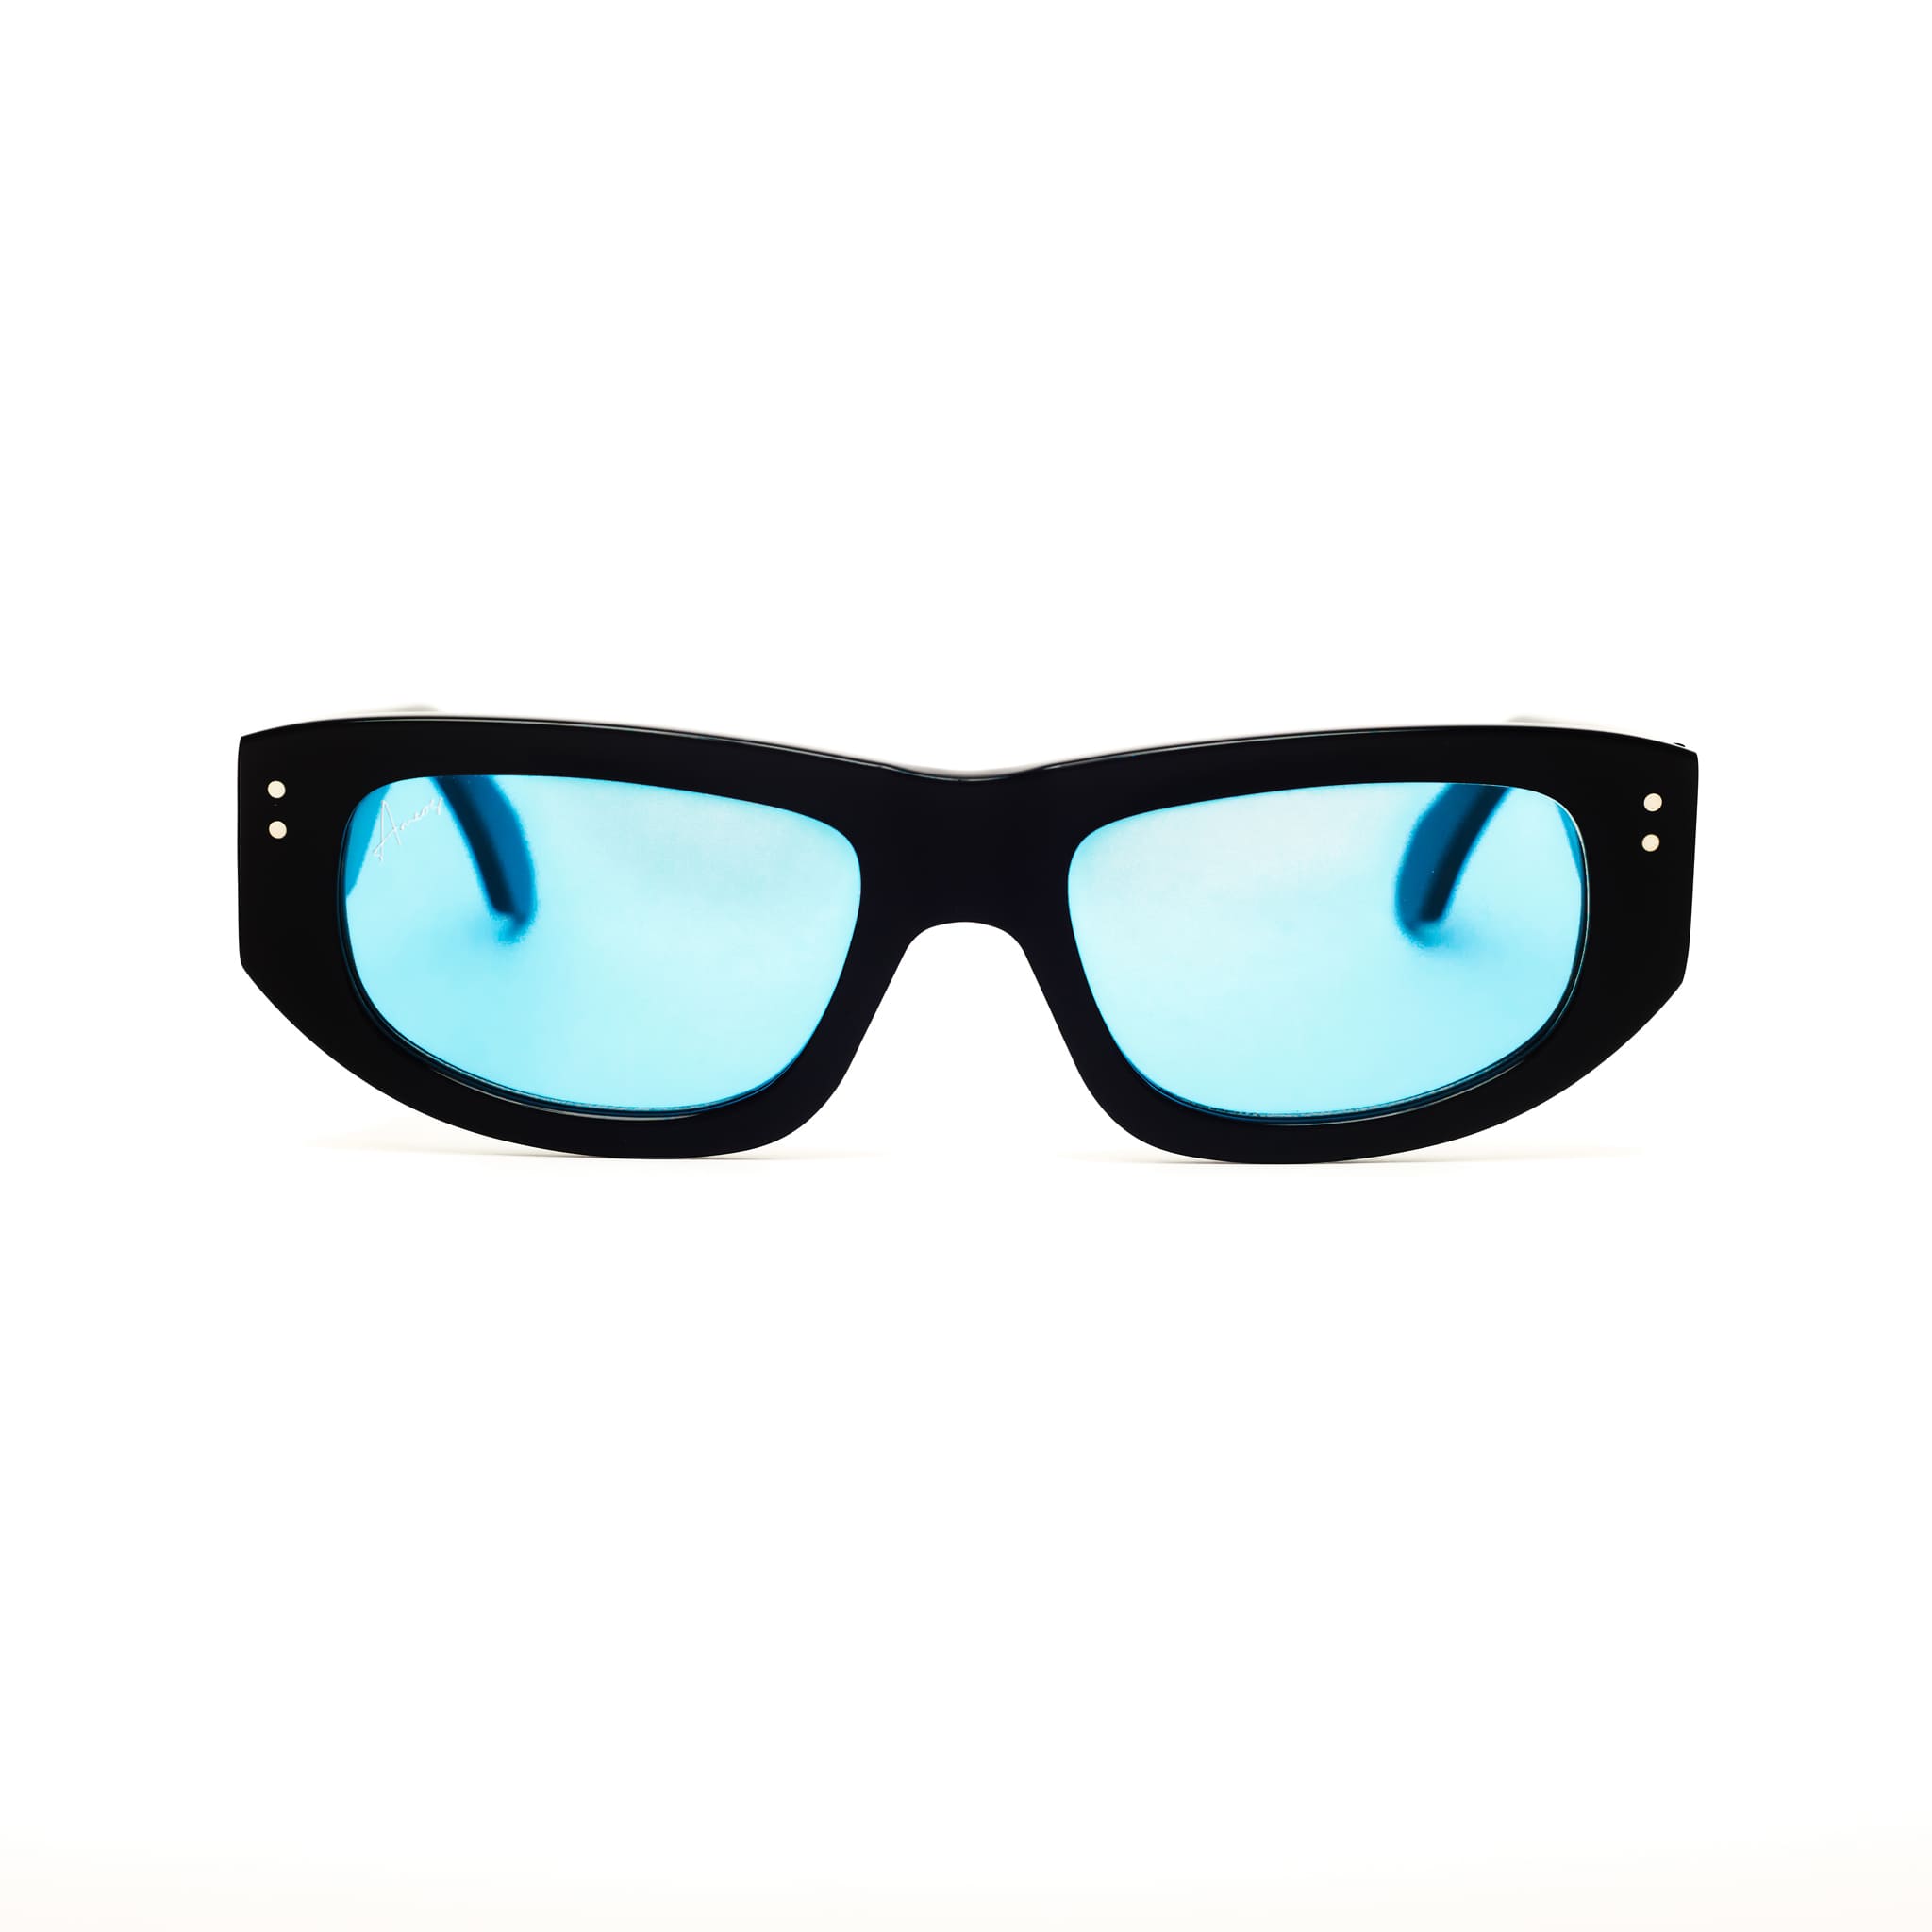 Ameos Forever collection Lex model. Black frames with turquoise lenses. Front view. Genderless, gender neutral eyewear